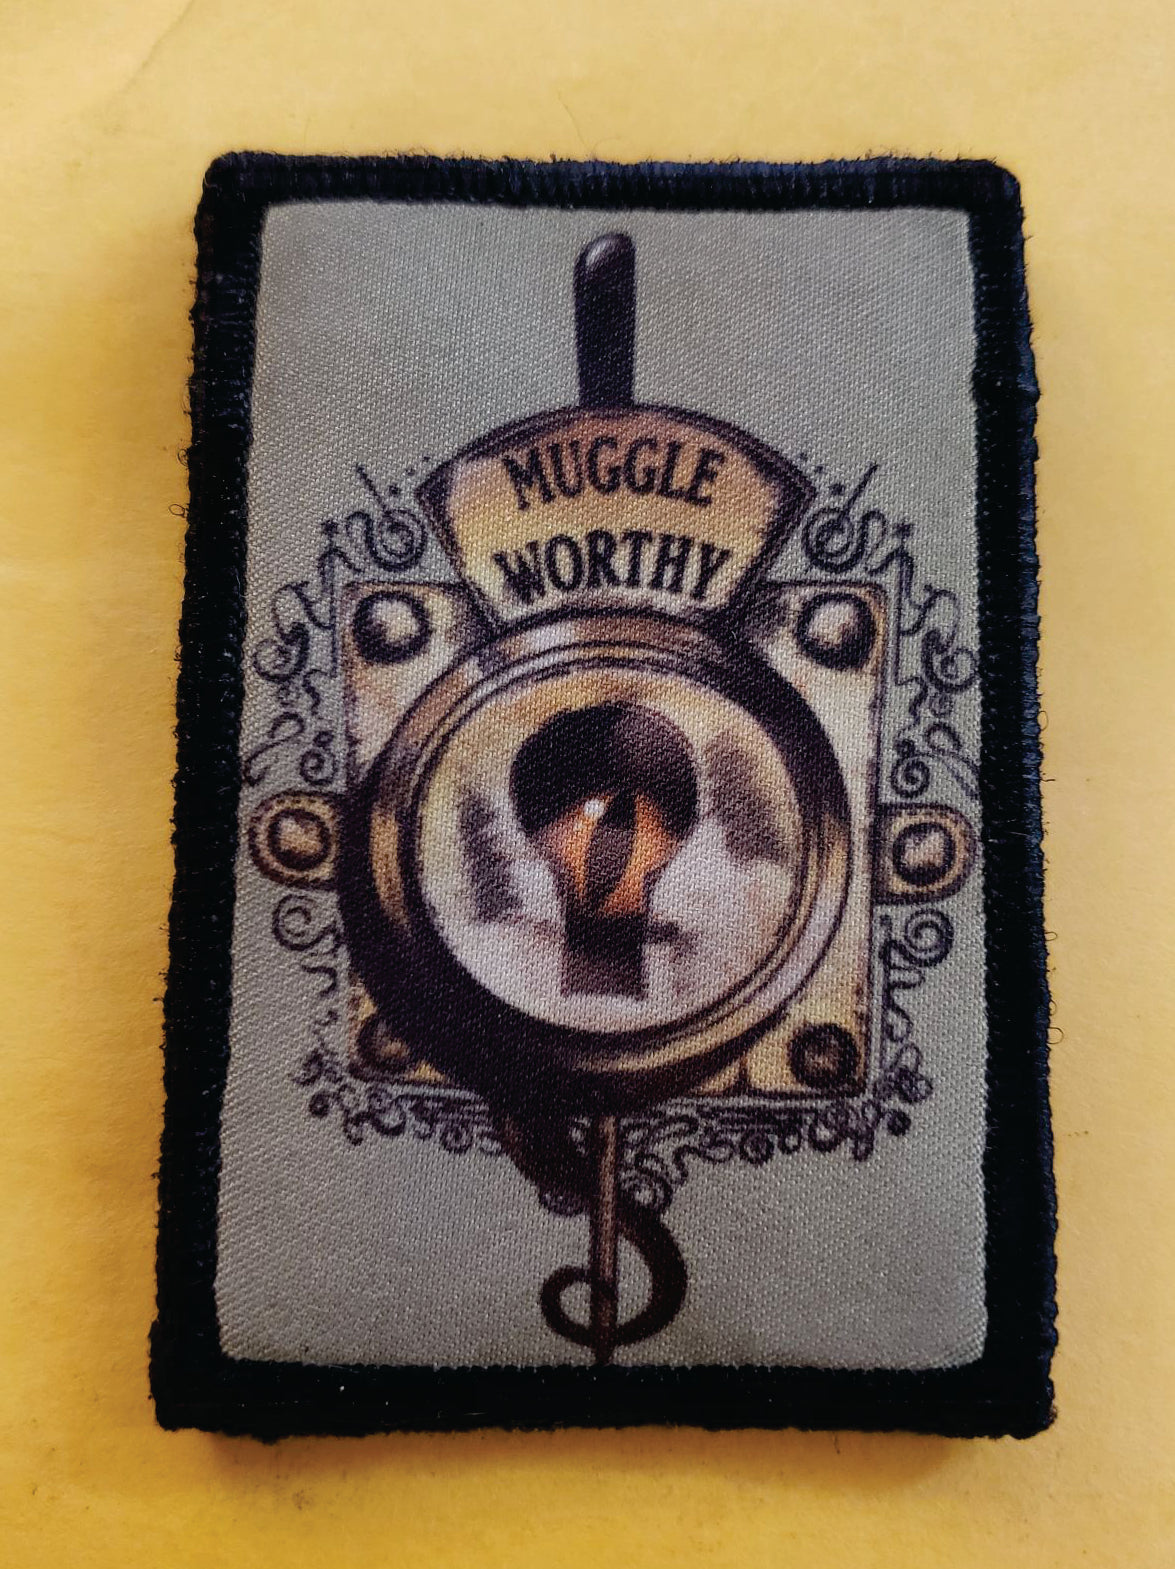 Muggle Worthy Harry Potter Morale Patch Morale Patches Redheaded T Shirts 